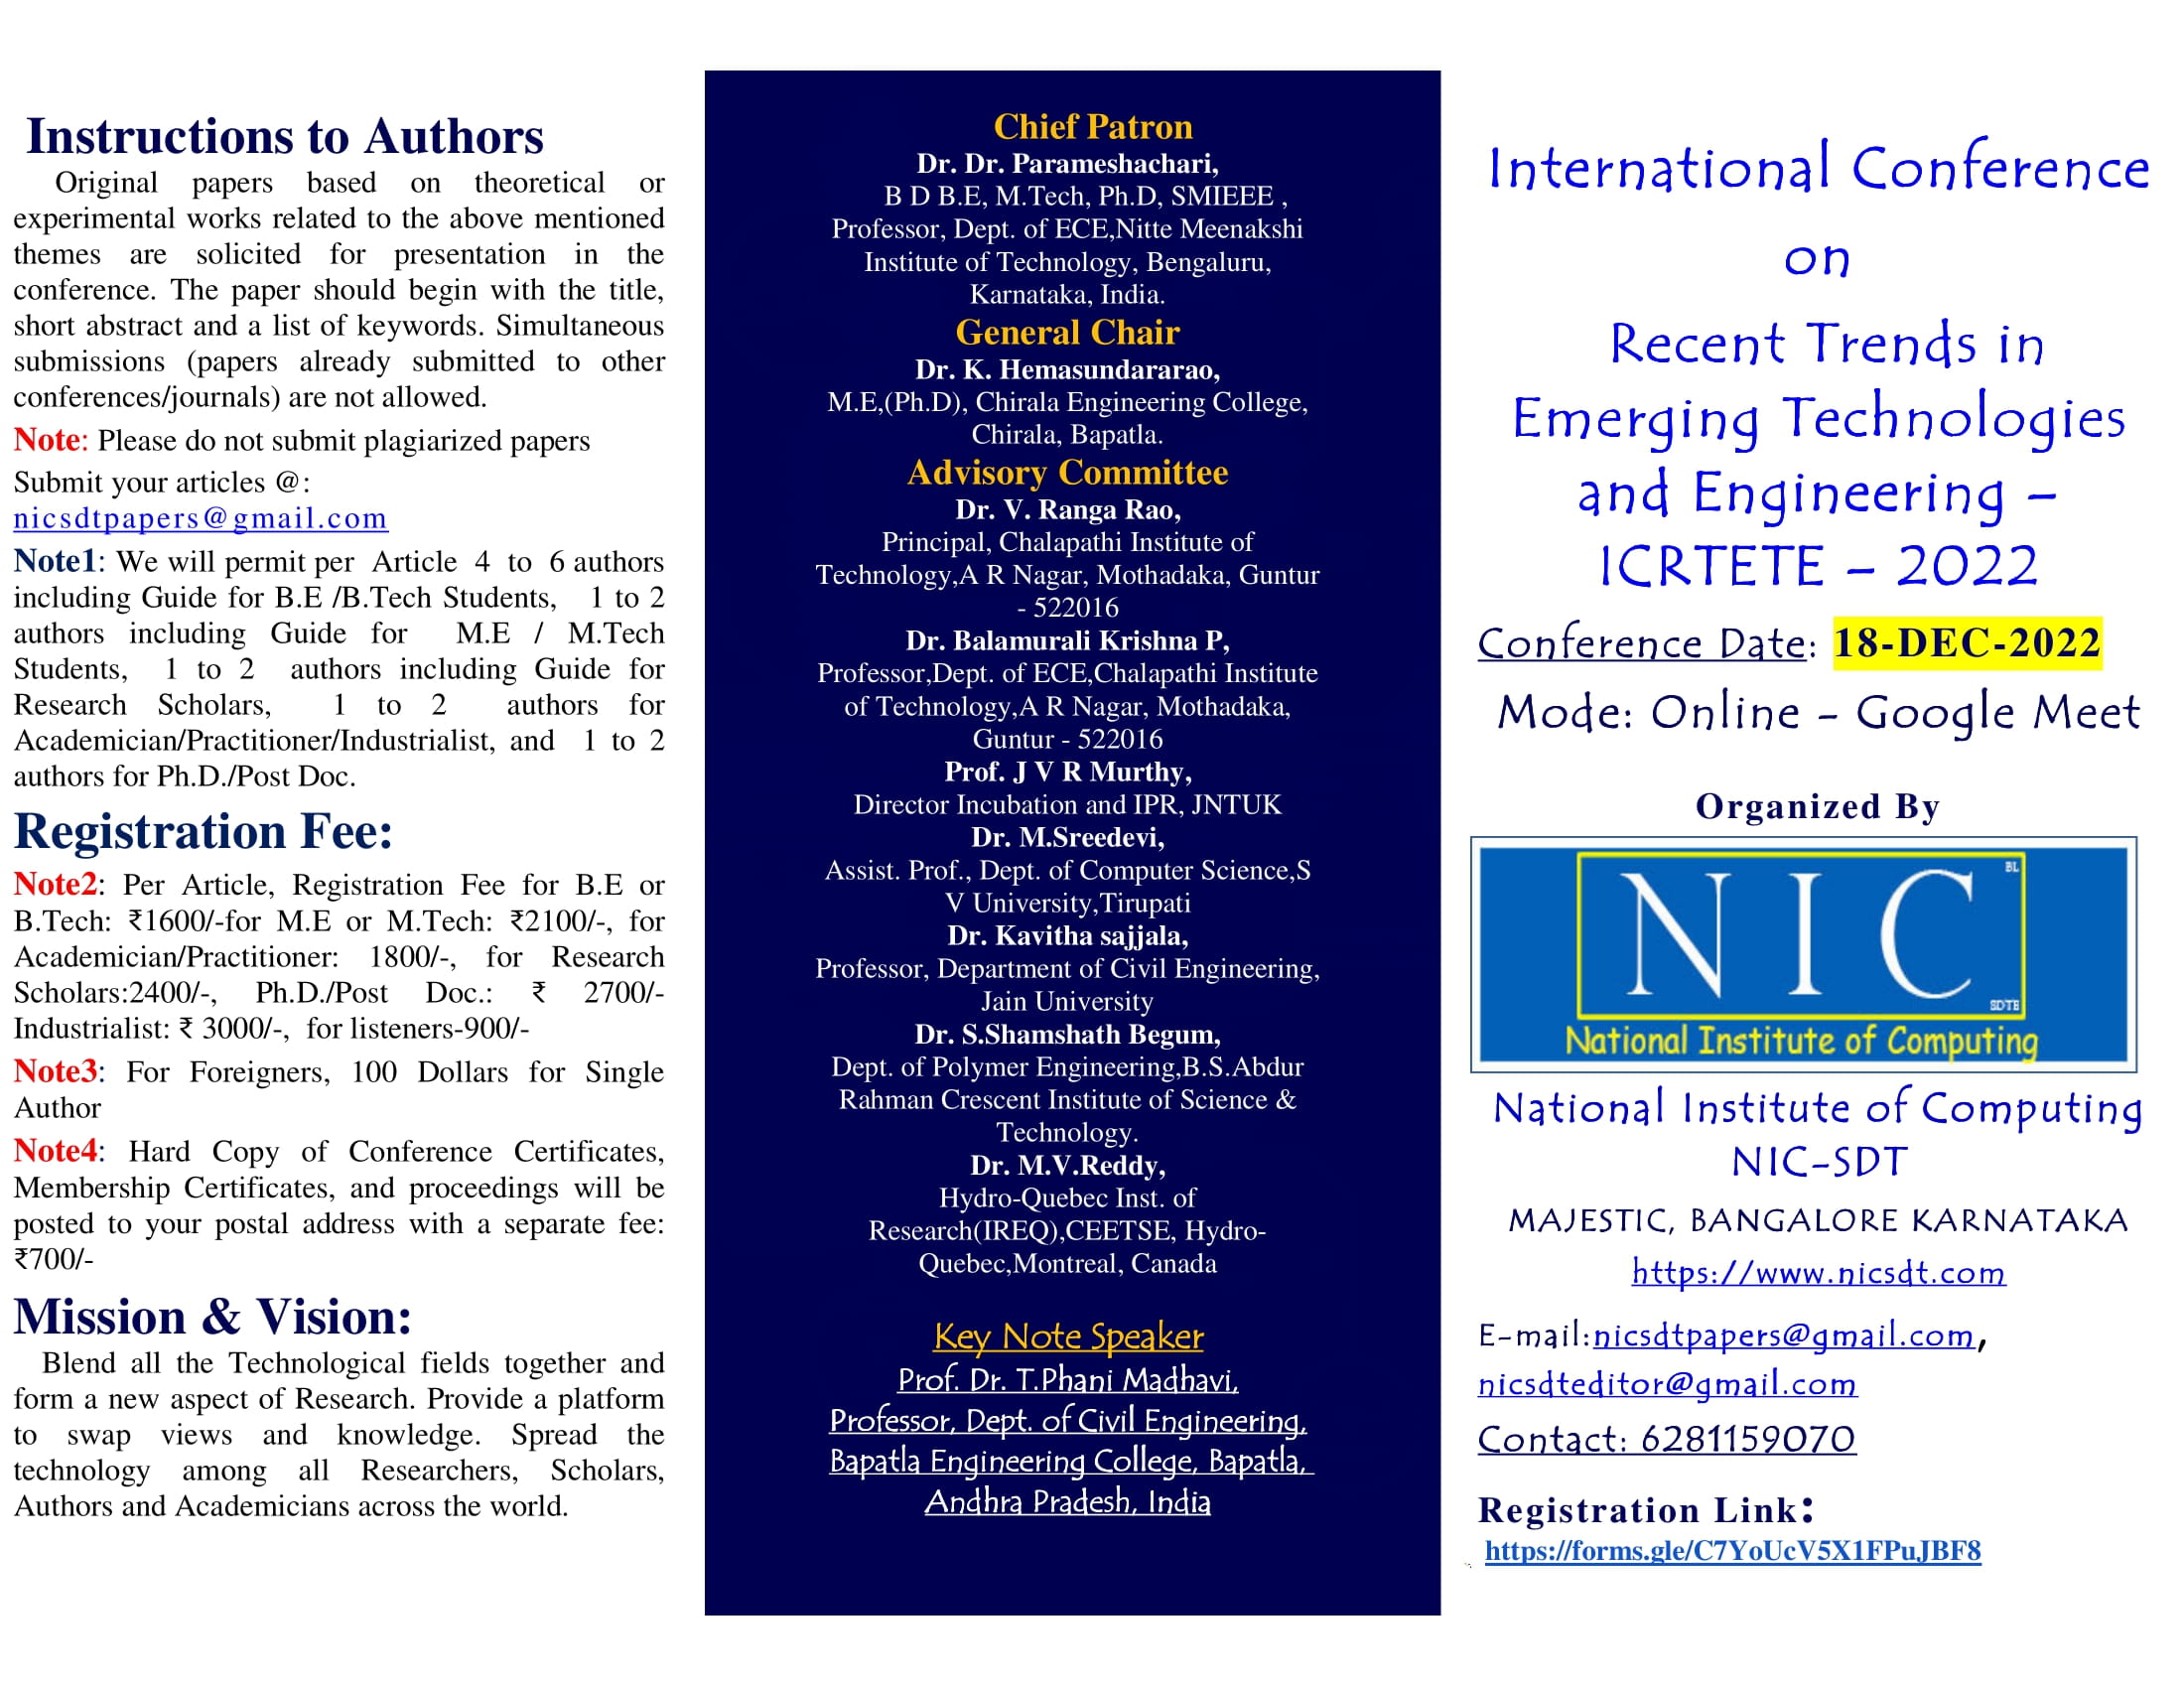 International Conference on Recent Trends in Emerging Technologies and Engineering ICRTETE 2022